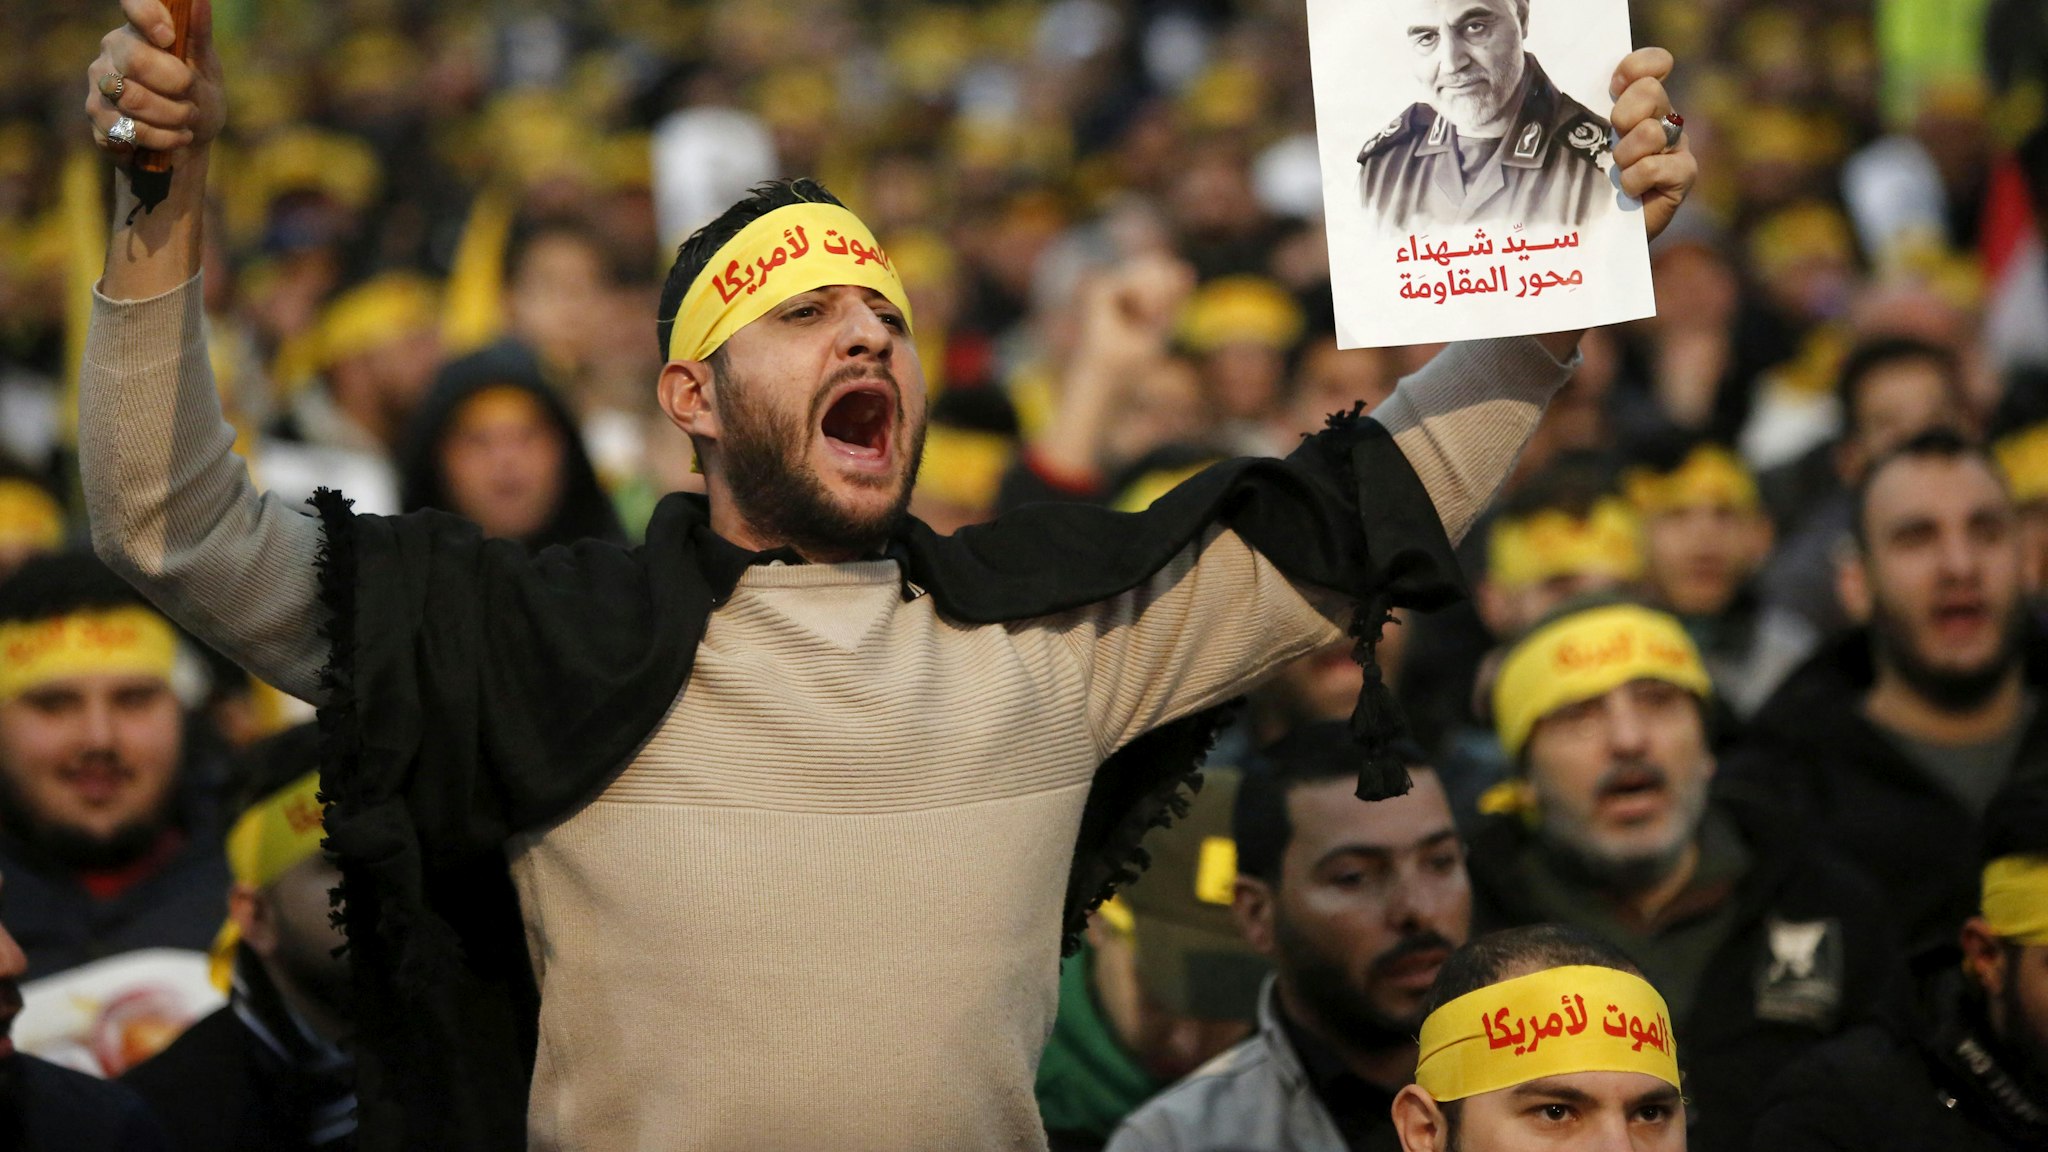 BEIRUT, Jan. 5, 2020 -- Supporters shout slogans during a rally for Qassem Soleimani in southern suburbs of Beirut, Lebanon, on Jan. 5, 2020. Hezbollah leader Sayyed Hassan Nasrallah urged on Sunday its fighters to attack U.S. soldiers in the region in retaliation for the assassination of Iranian top commander Qassem Soleimani by the United States.